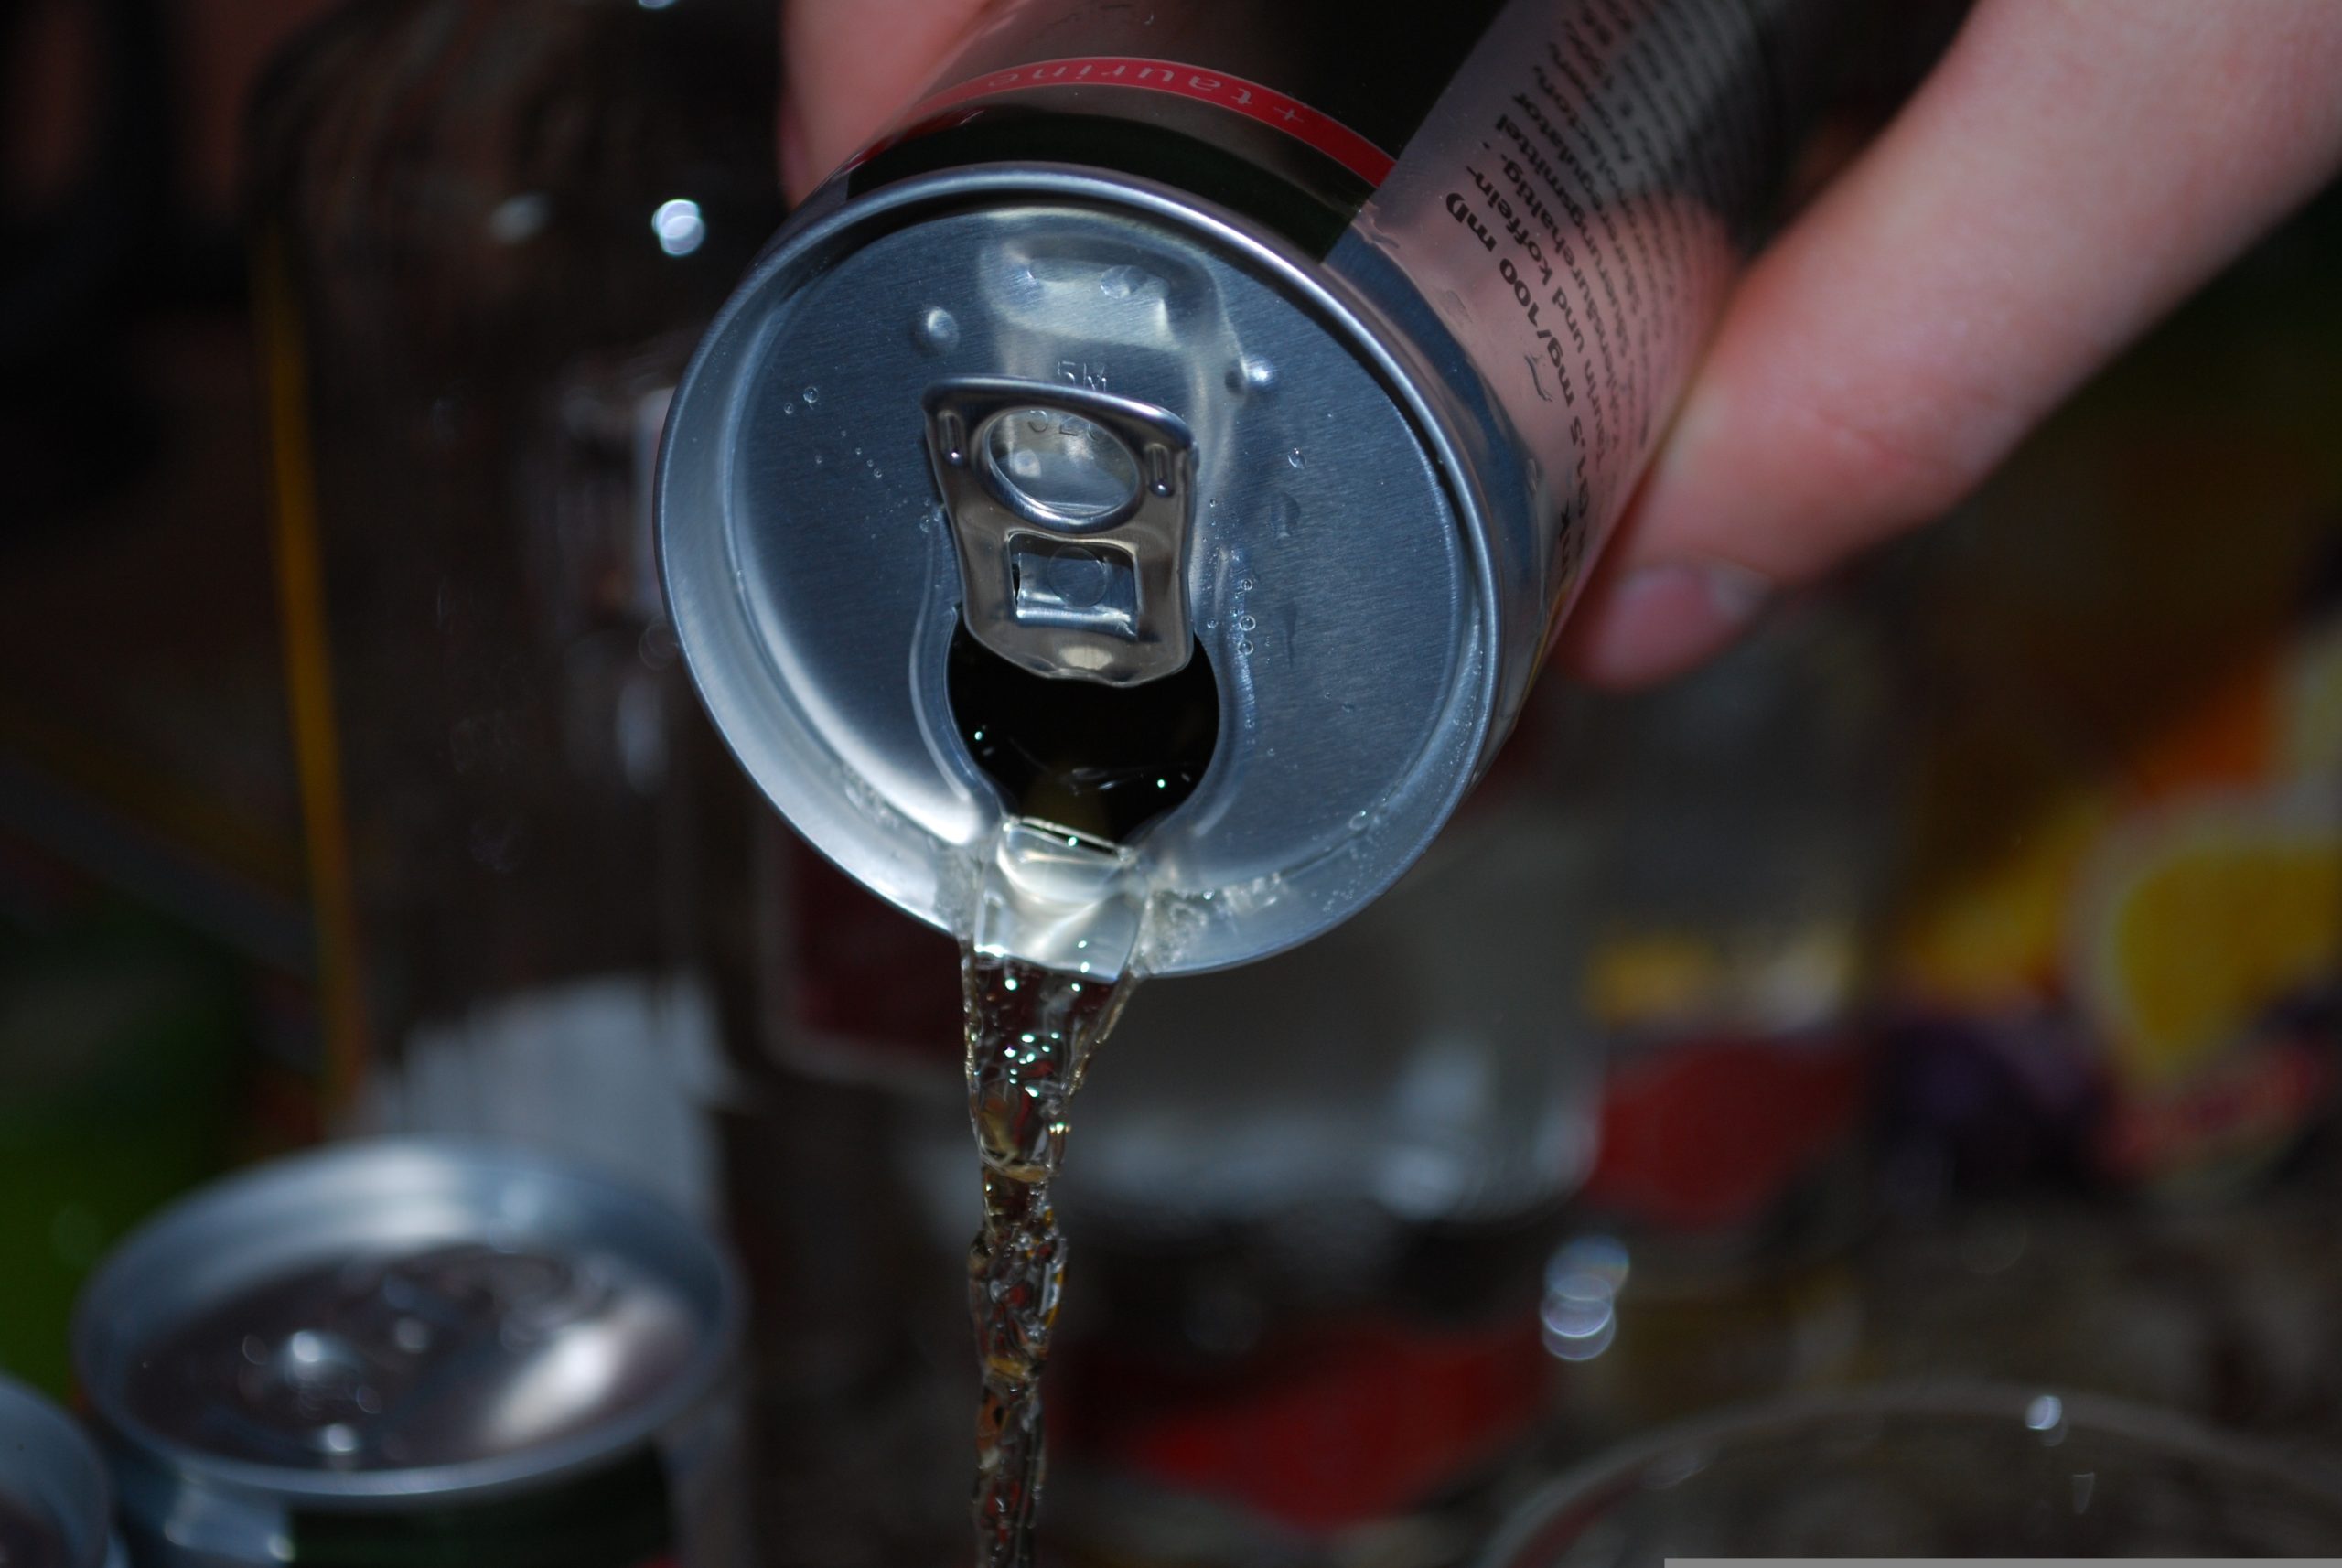 This region in Spain is banning energy drinks for children and teenagers